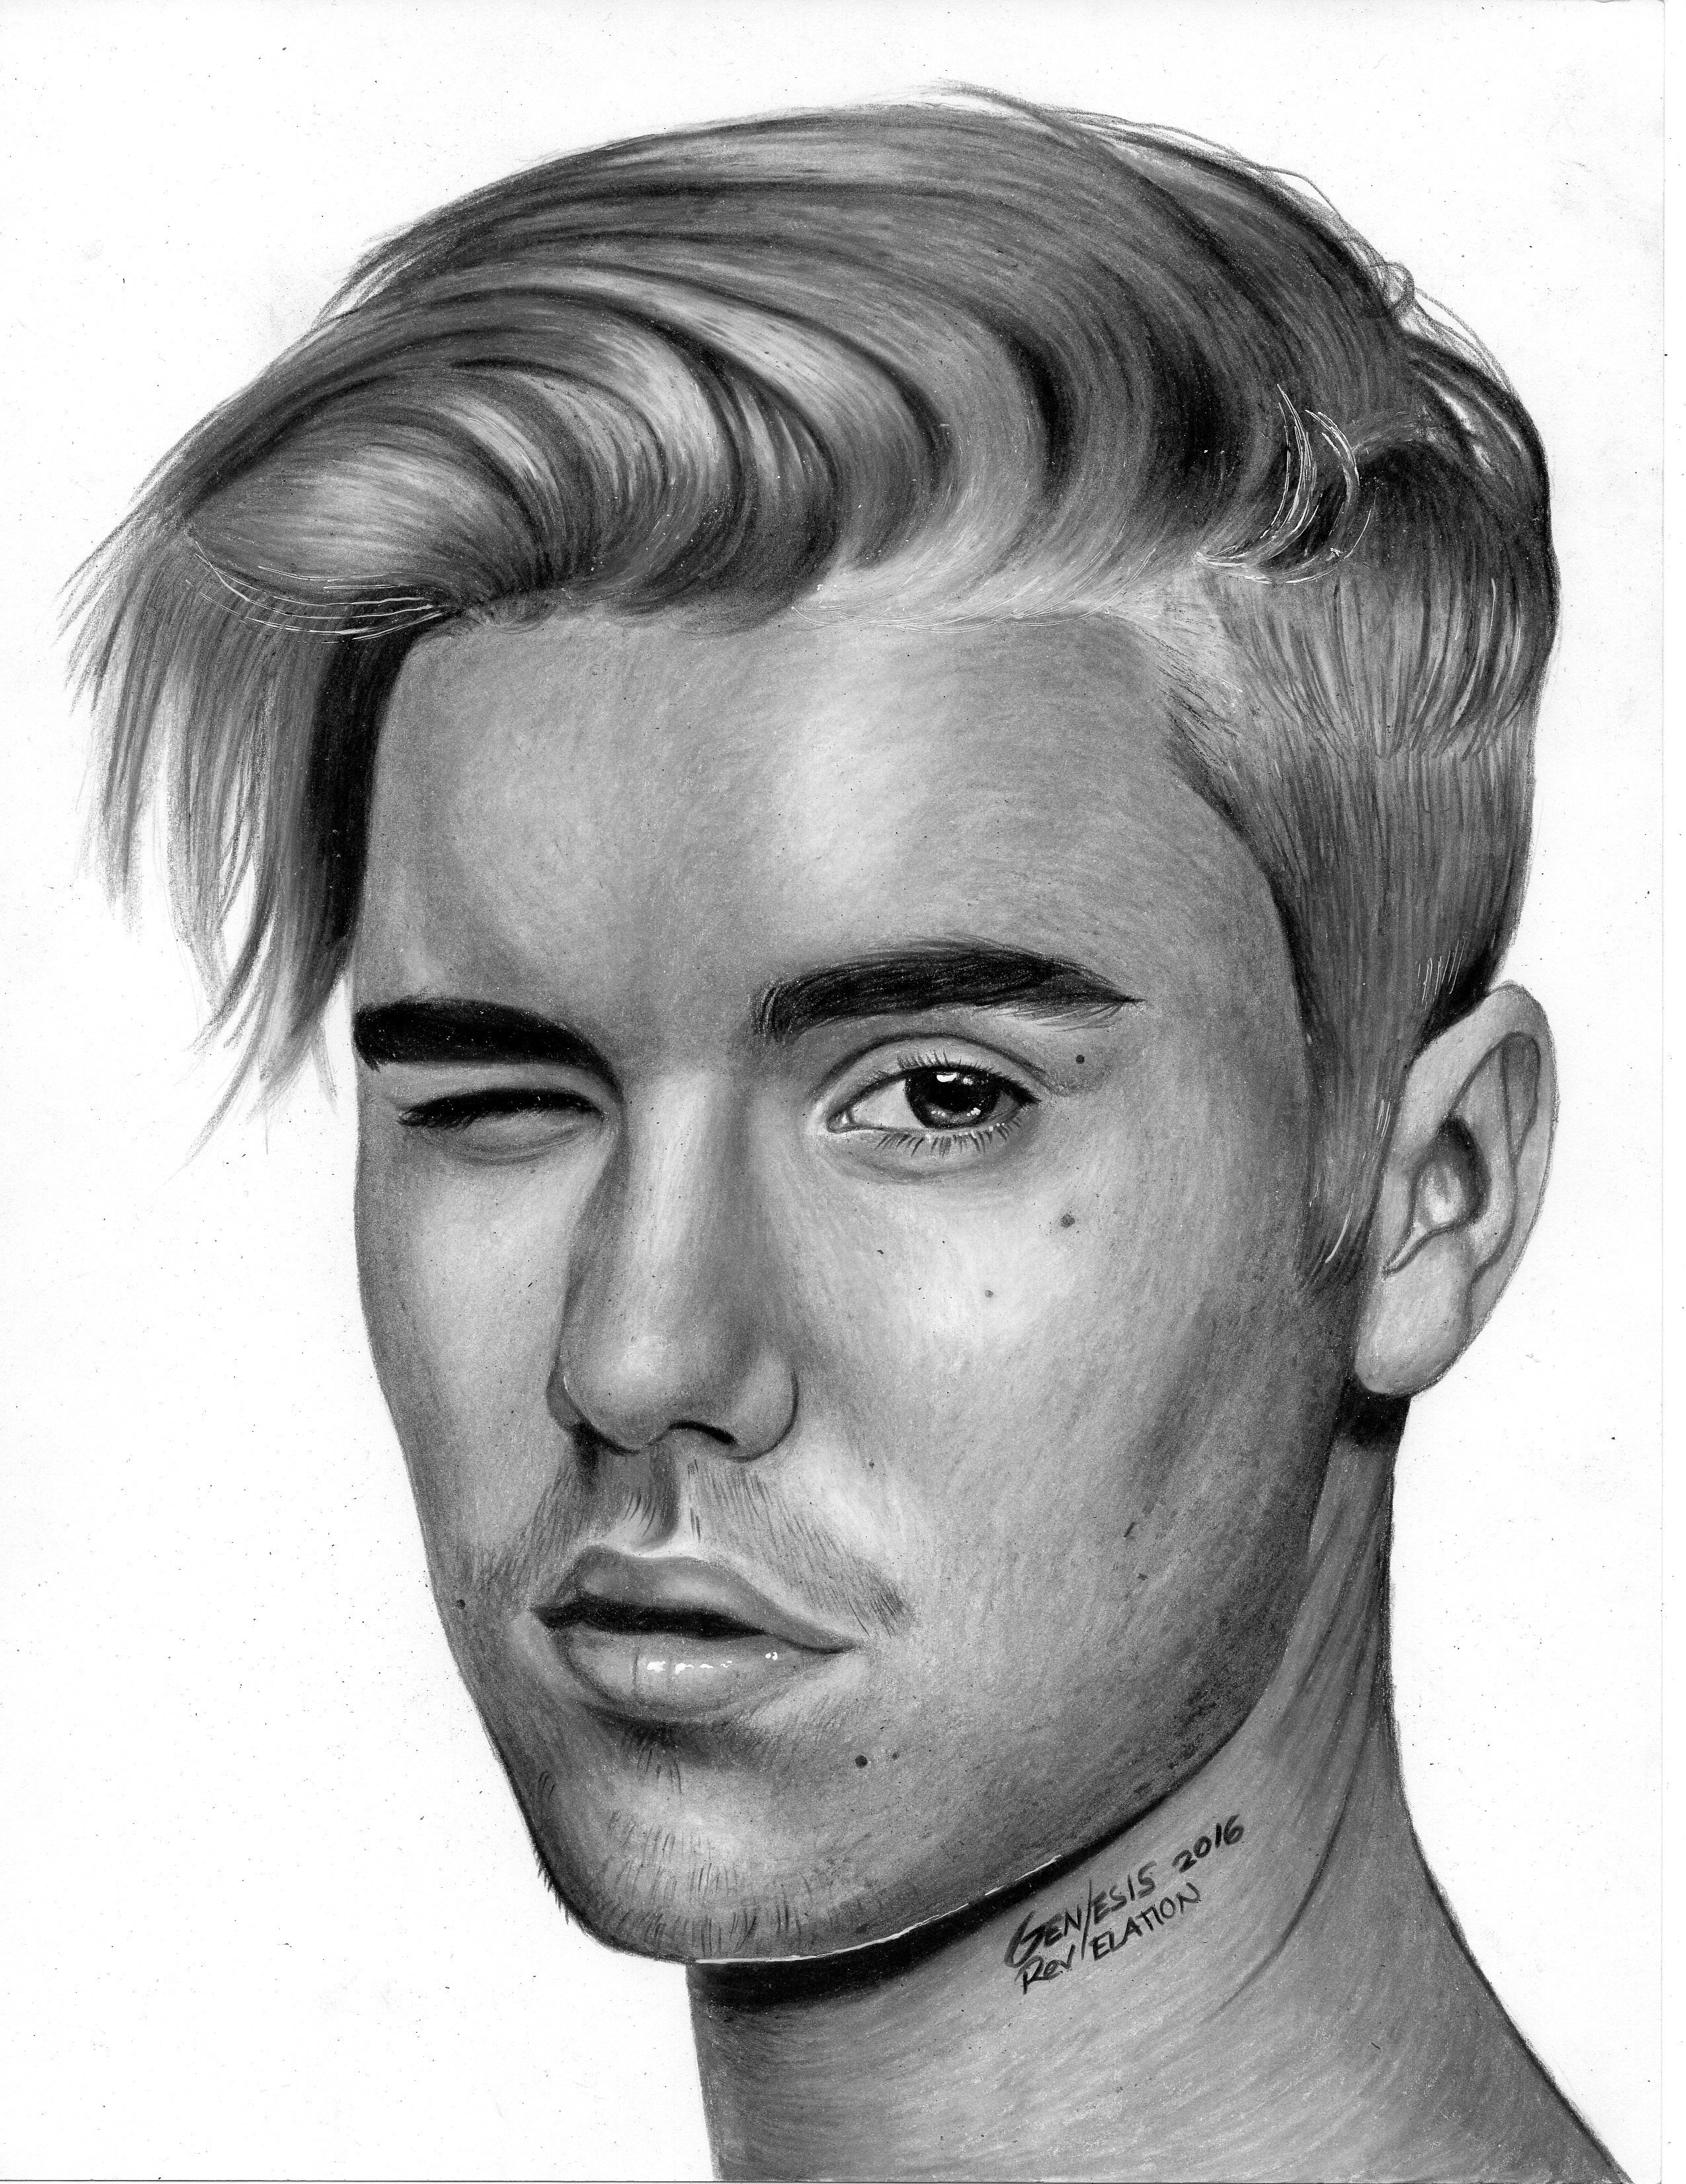 How to draw Justin Bieber